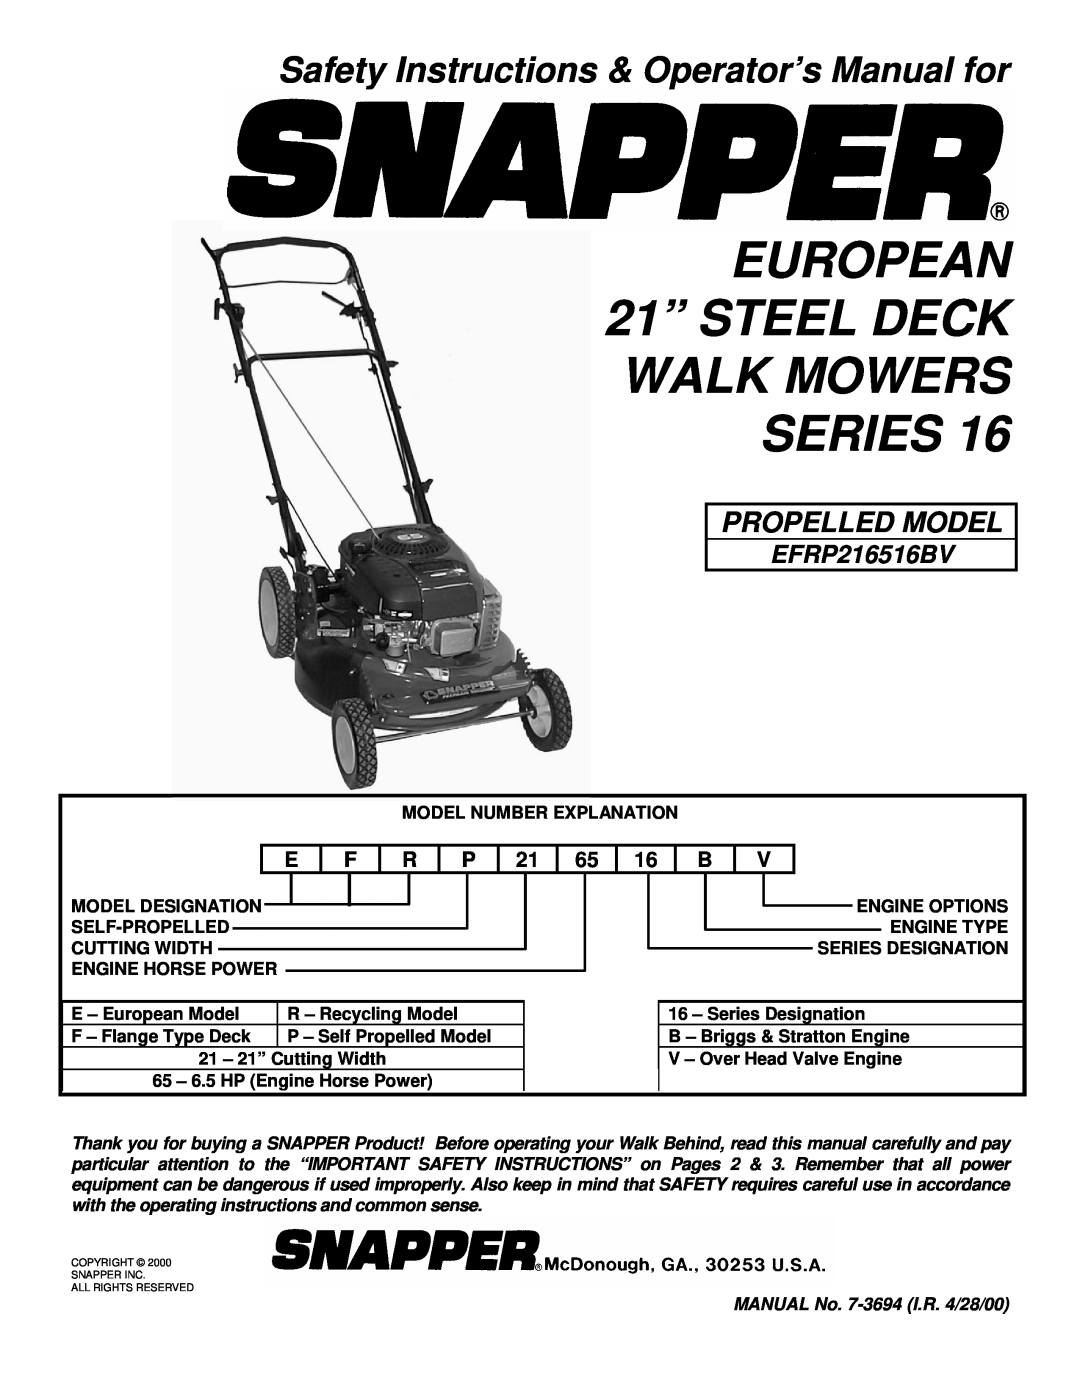 Snapper EFRP216516BV important safety instructions EUROPEAN 21” STEEL DECK WALK MOWERS SERIES, Propelled Model 